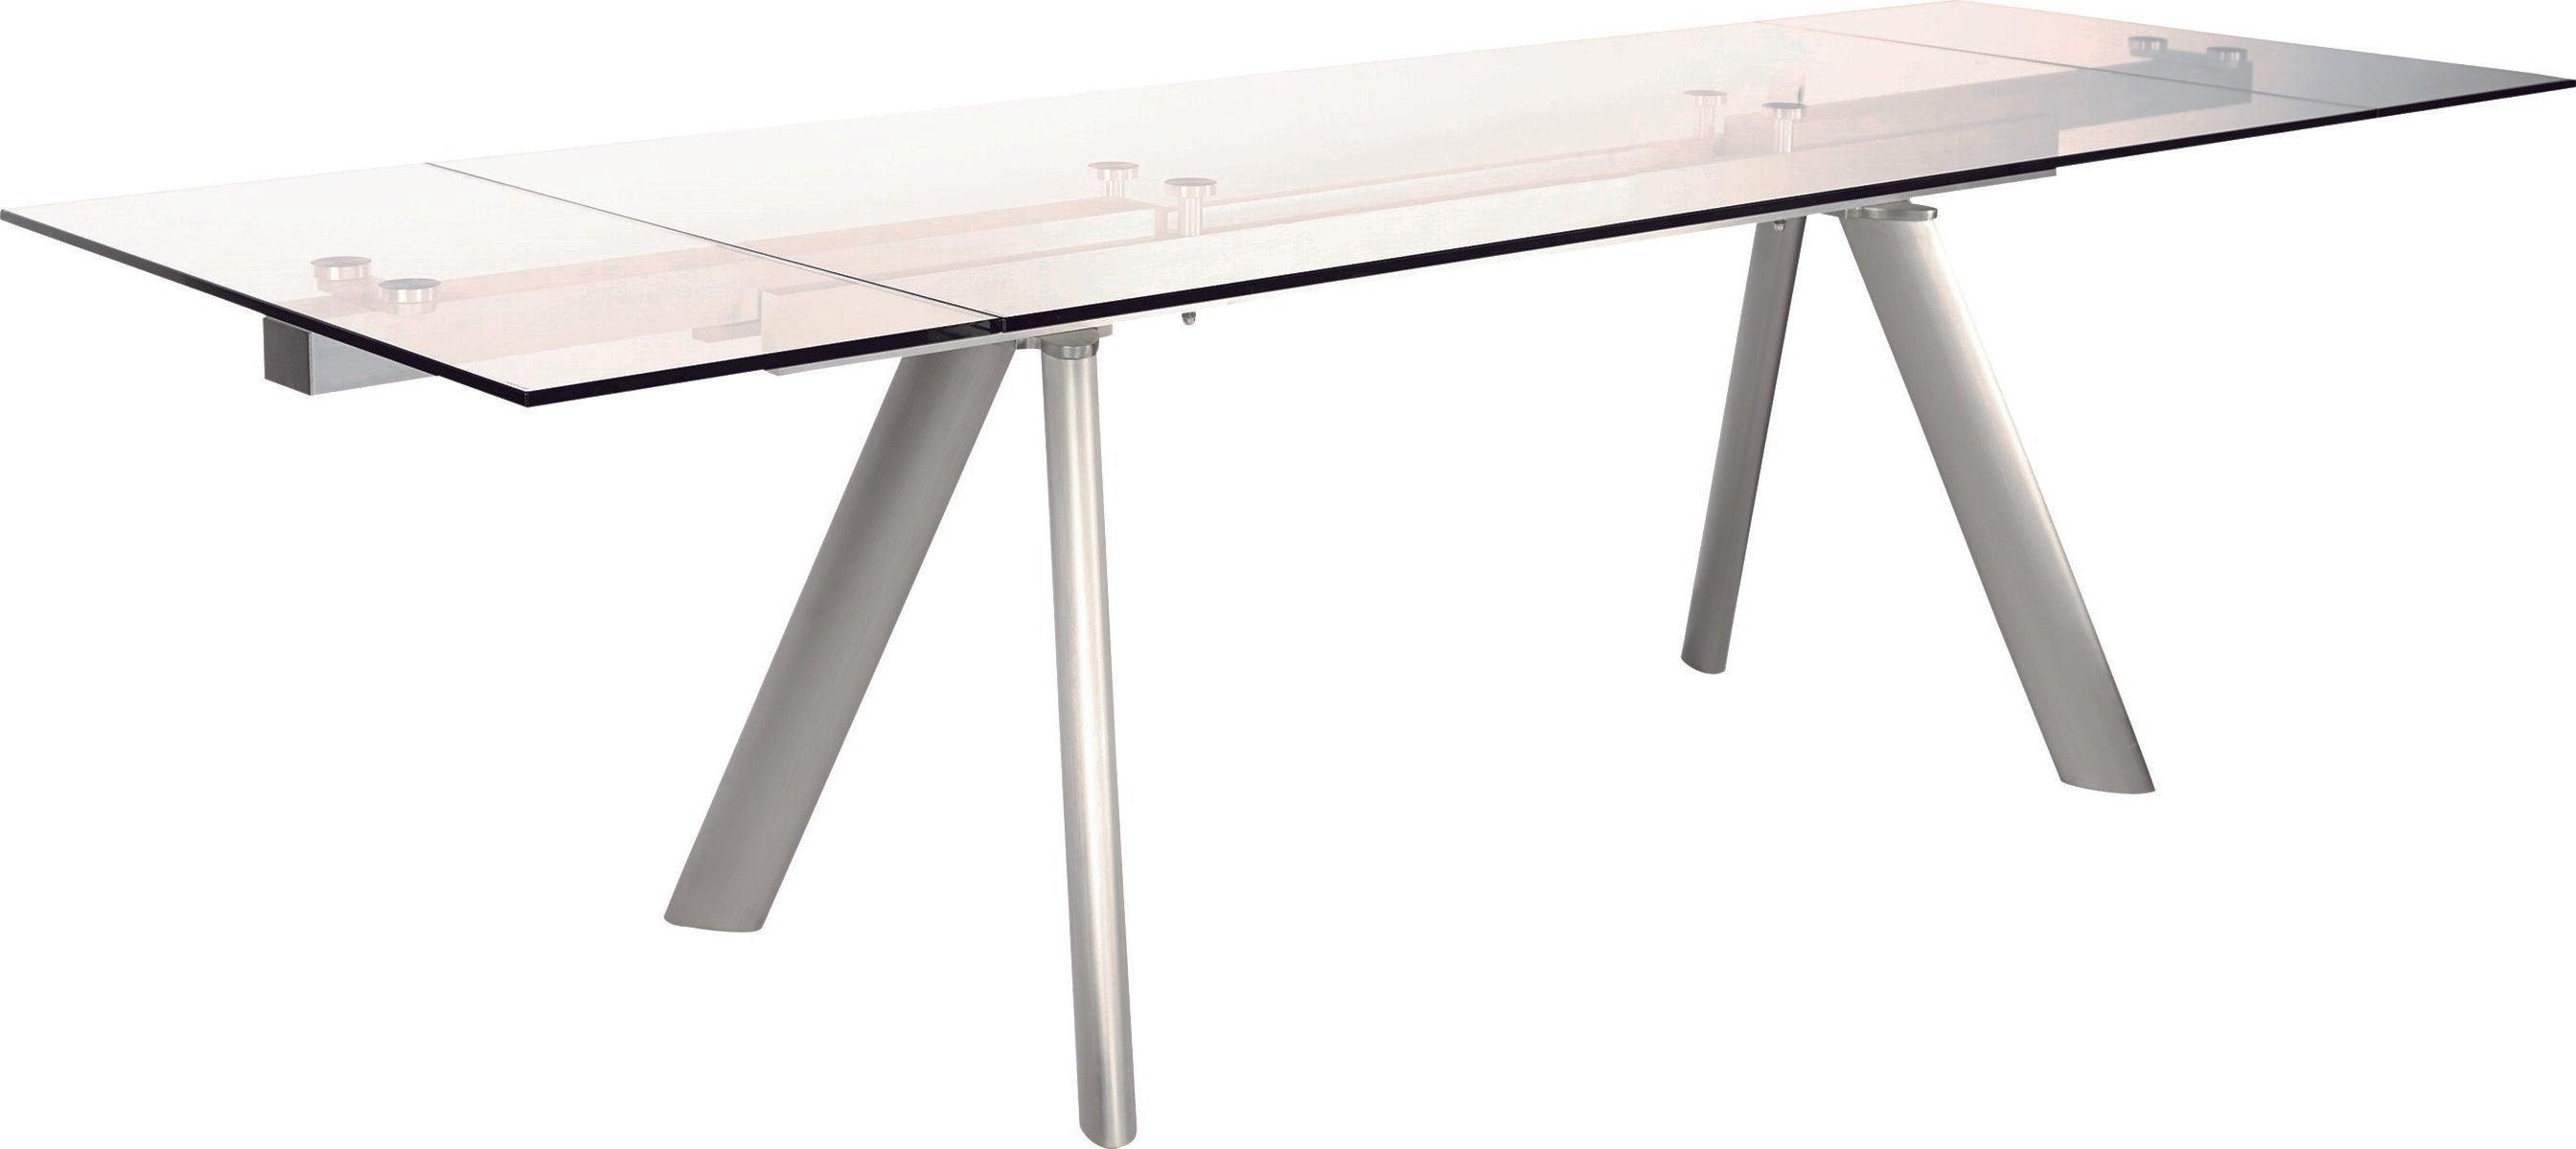 Euro Style Dining Tables - Delano 102" Rectangle Extension Dining Table Clear